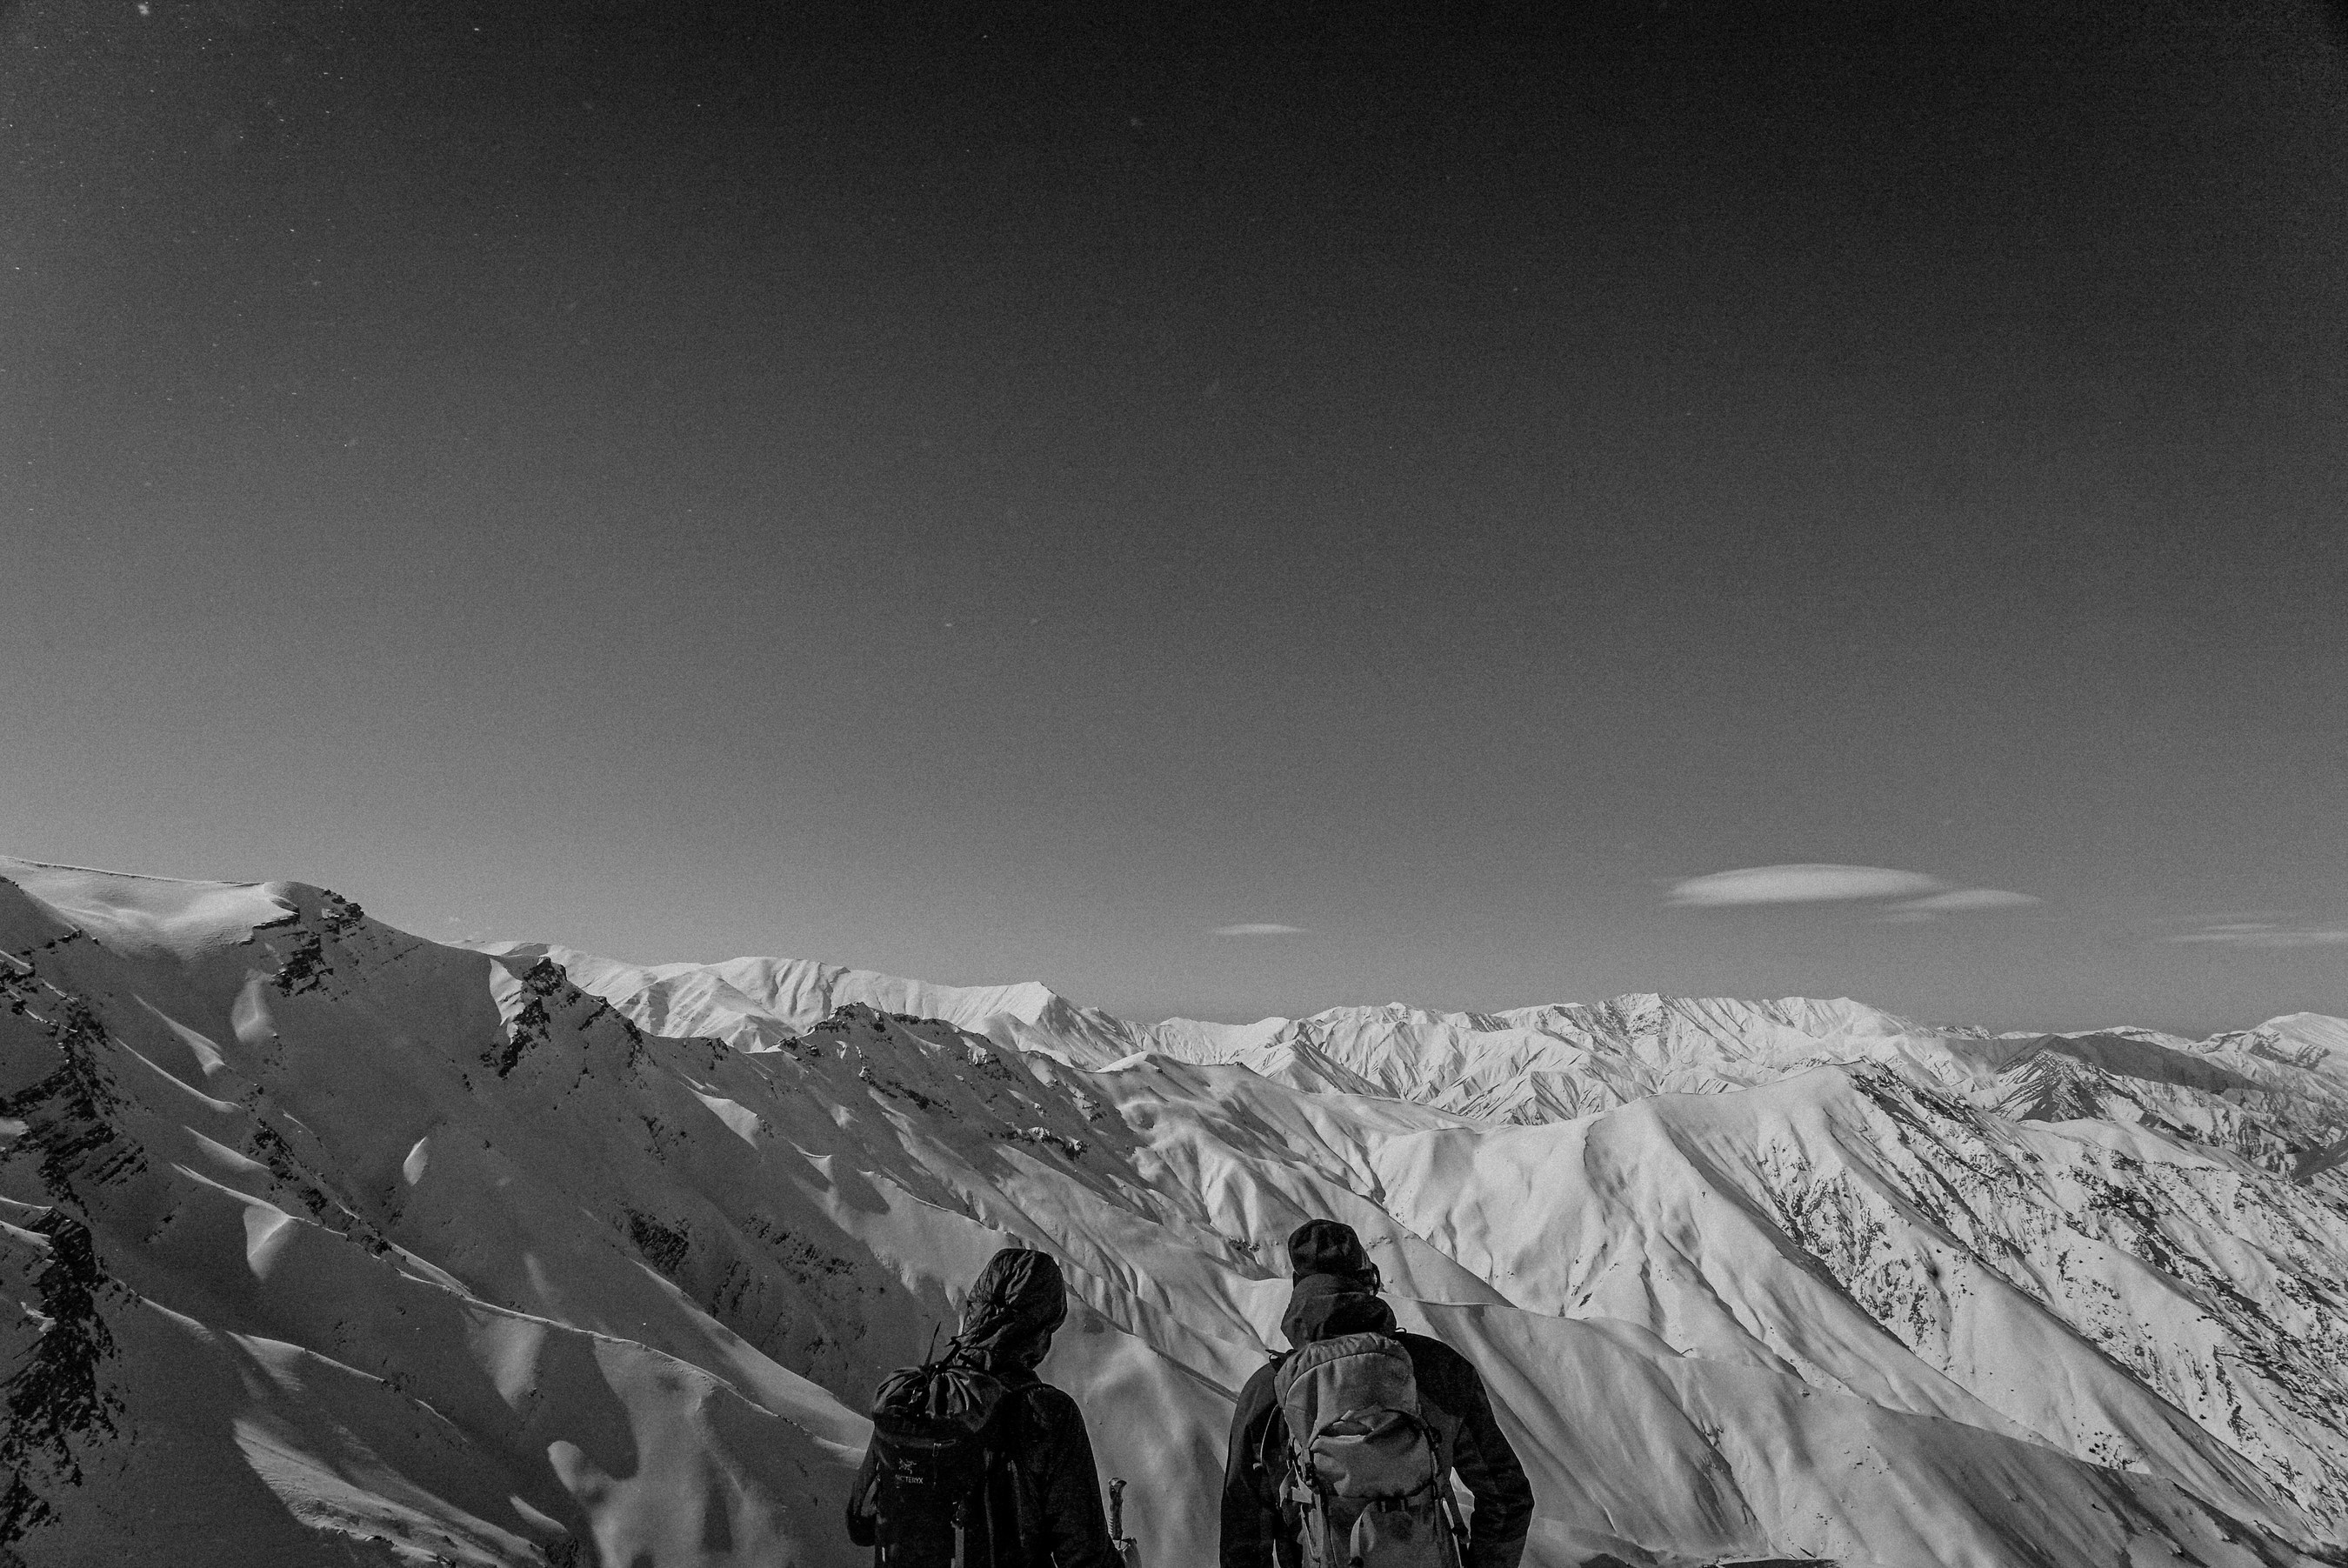 A Skier's Journey: Chad Sayers and Forrest Coots in Iran